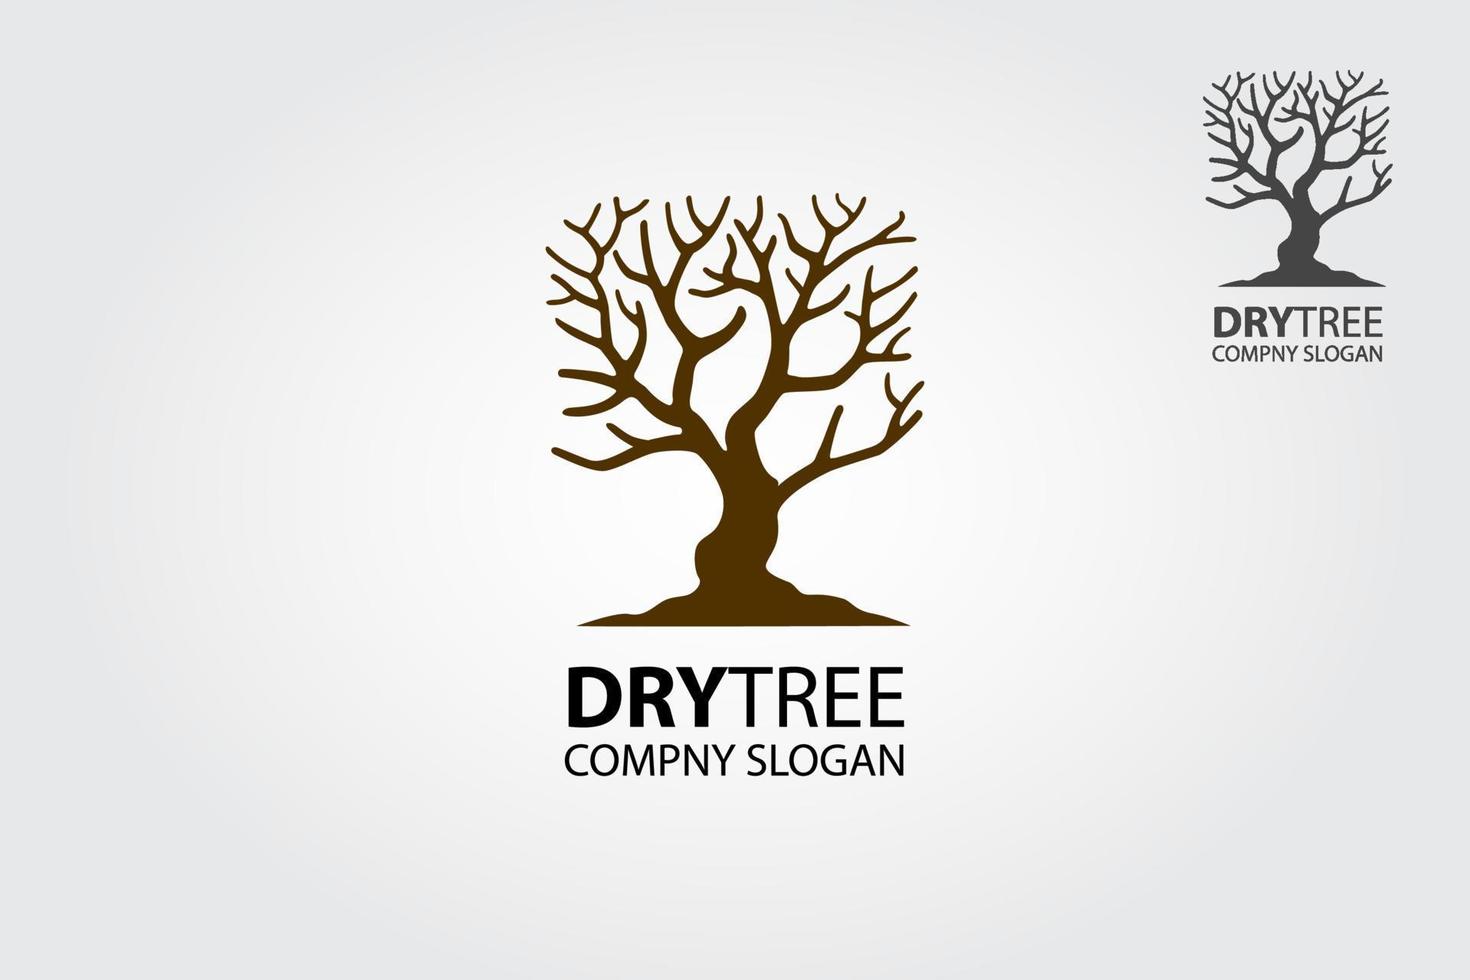 Dry Tree Vector Logo Template. Tree Logo Template Features. This logo is decorative, modern, clean and simple.